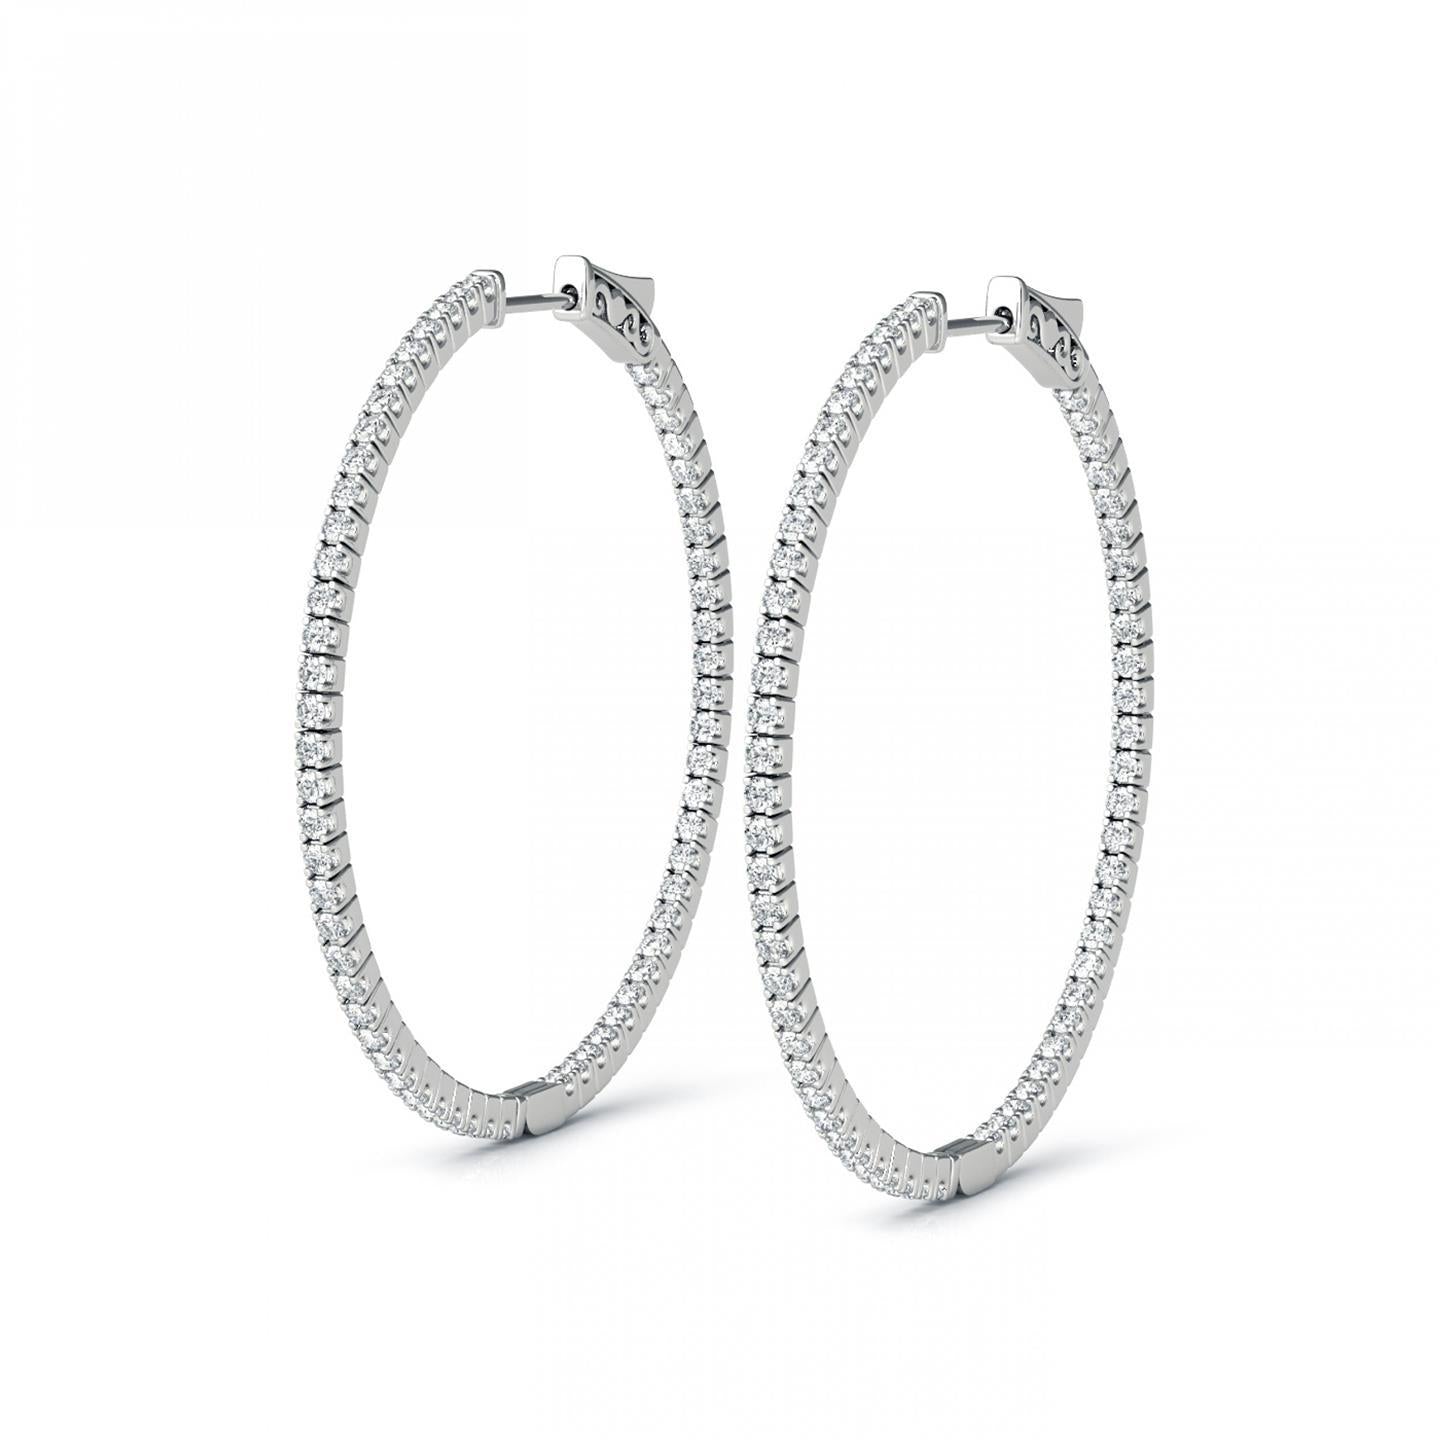 Small Round Cut 4 Carats Natural Diamonds Hoop Earrings Gold White 14K